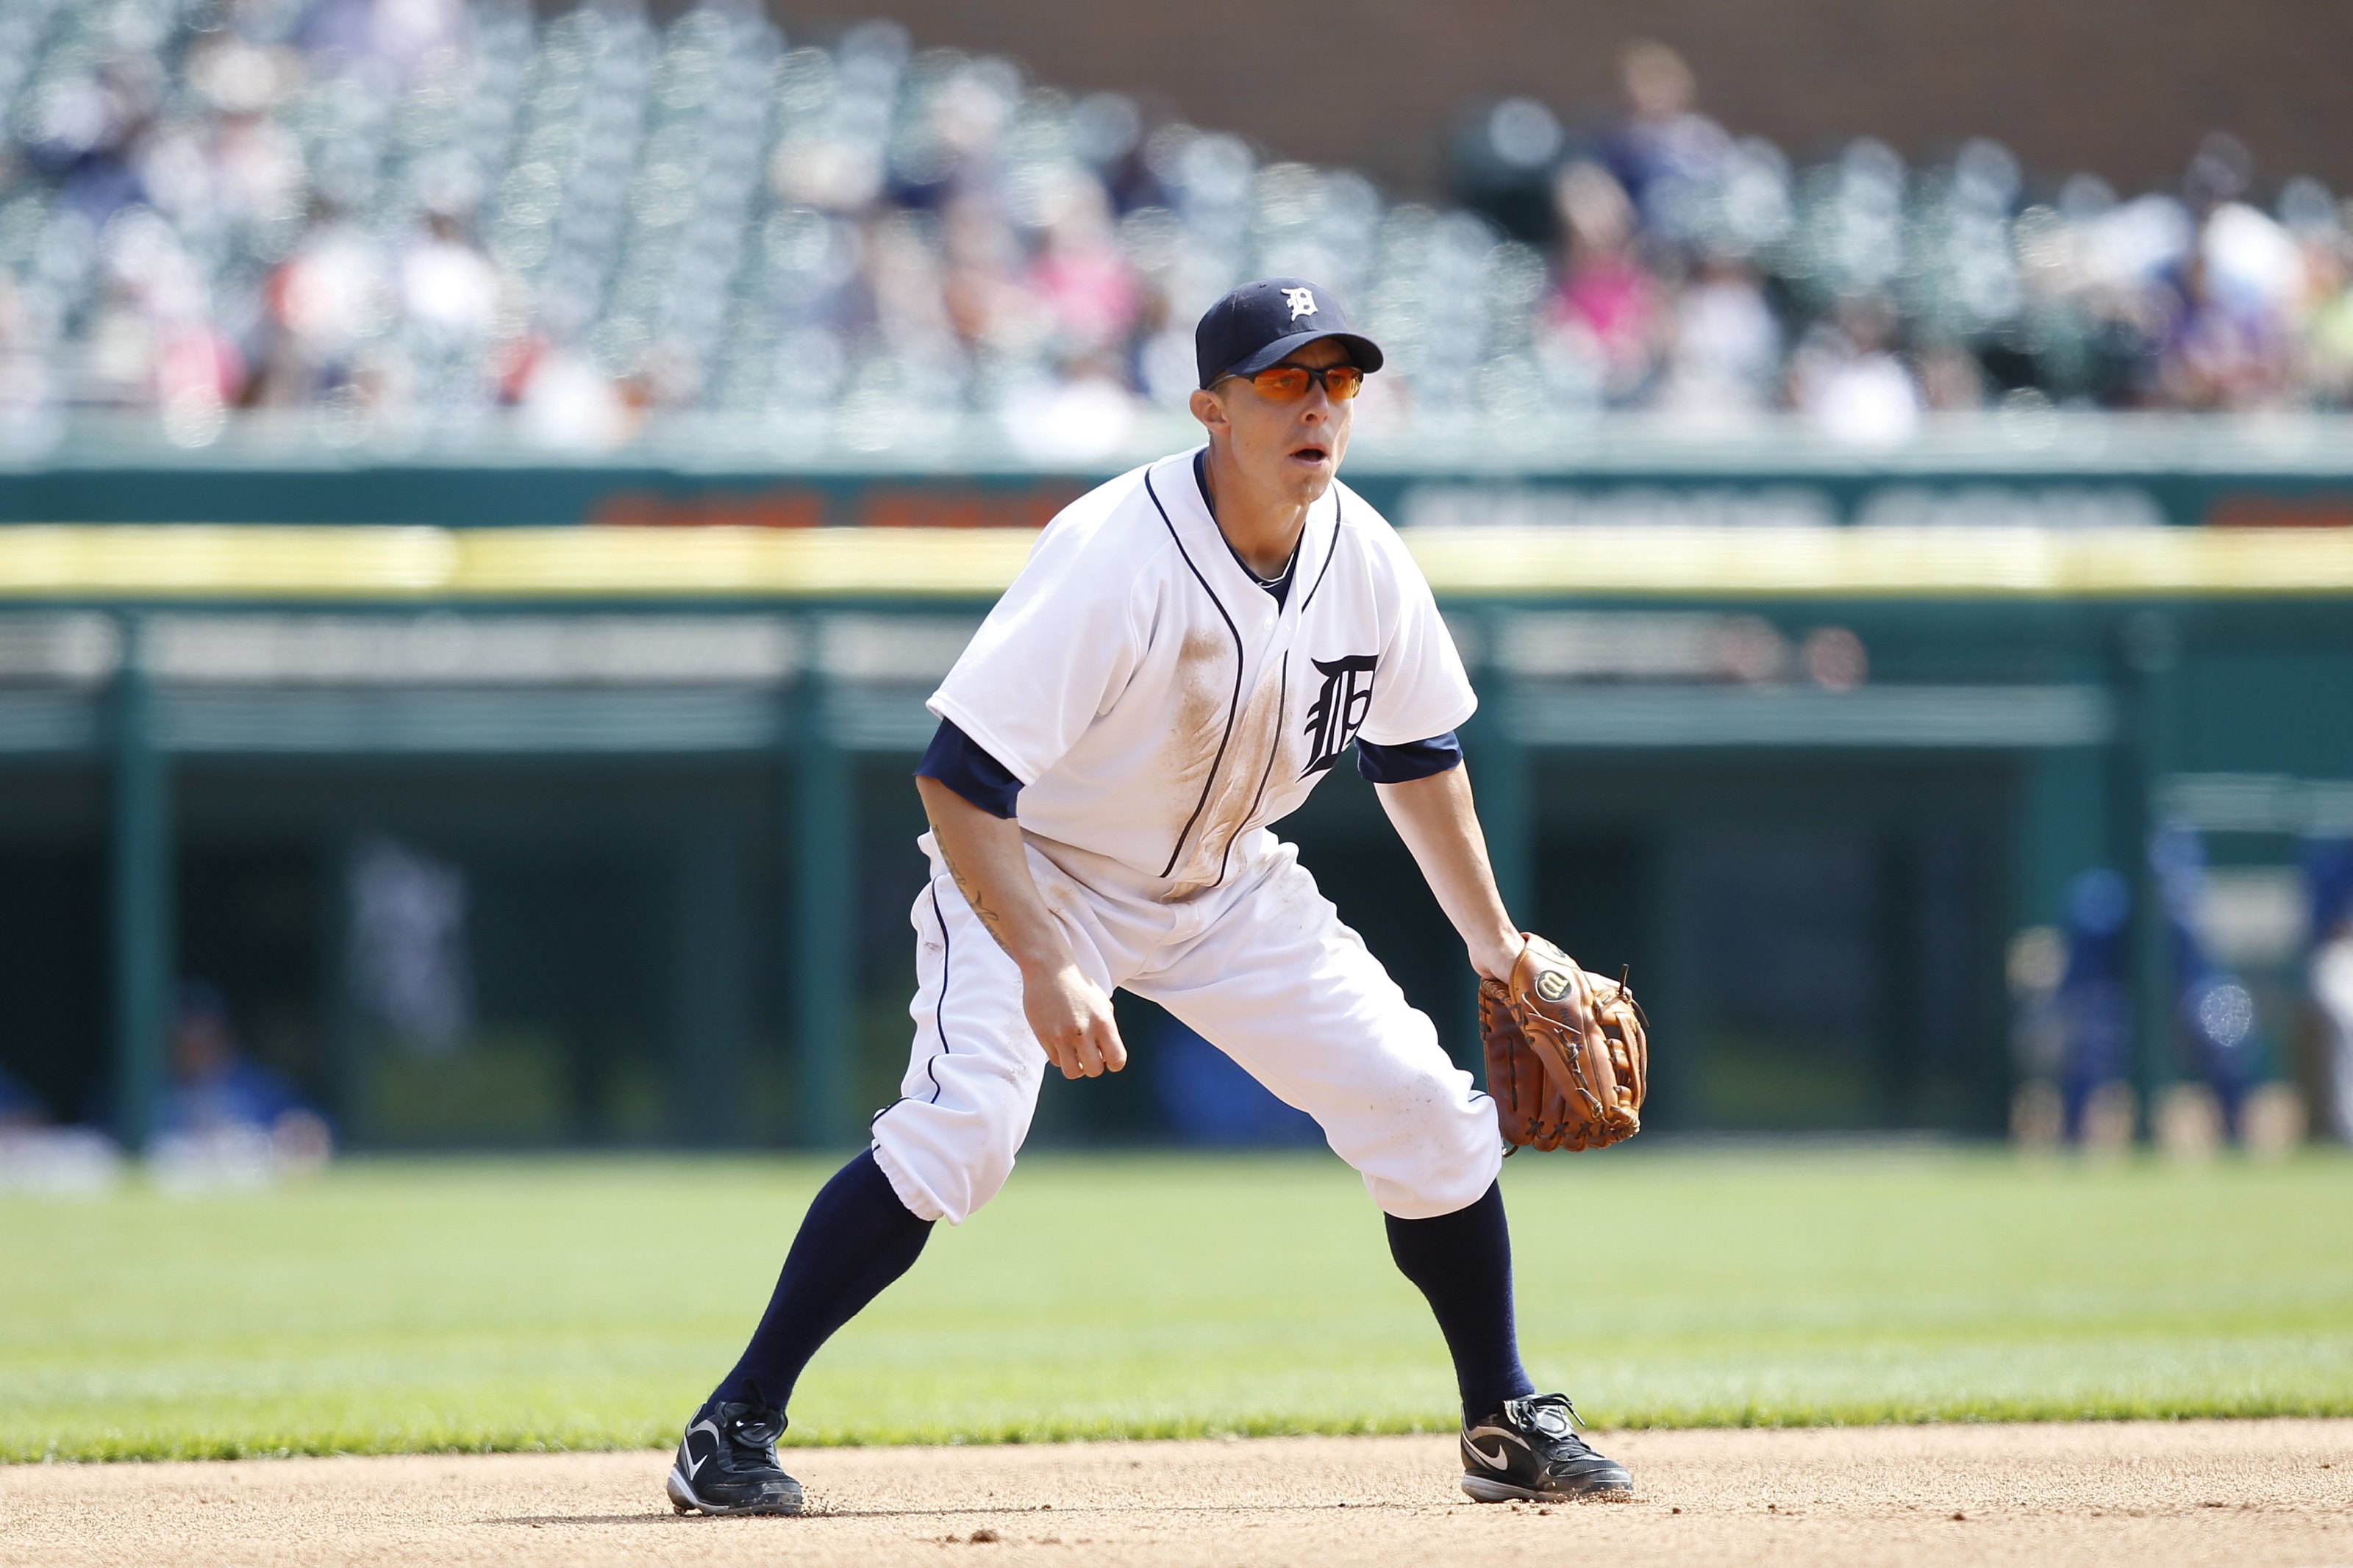 Brandon Inge to compete for second base job - Bless You Boys